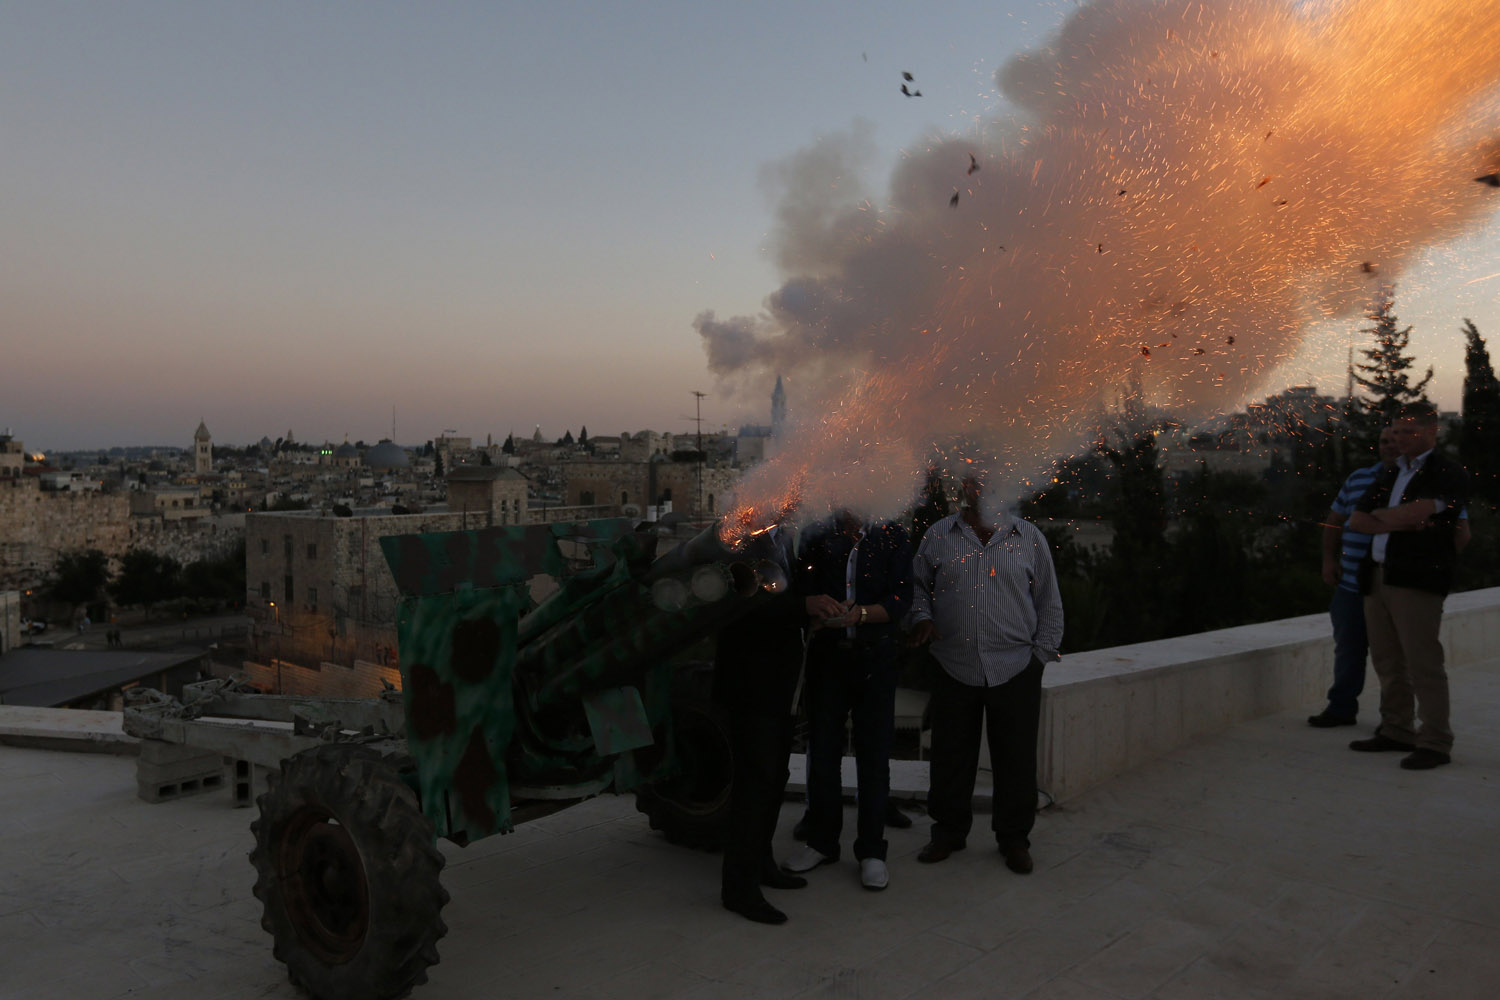 A cannon fires a ceremonial shot just outside Jerusalem's Old City, to mark the end of Muslims' daily fast during Ramadan